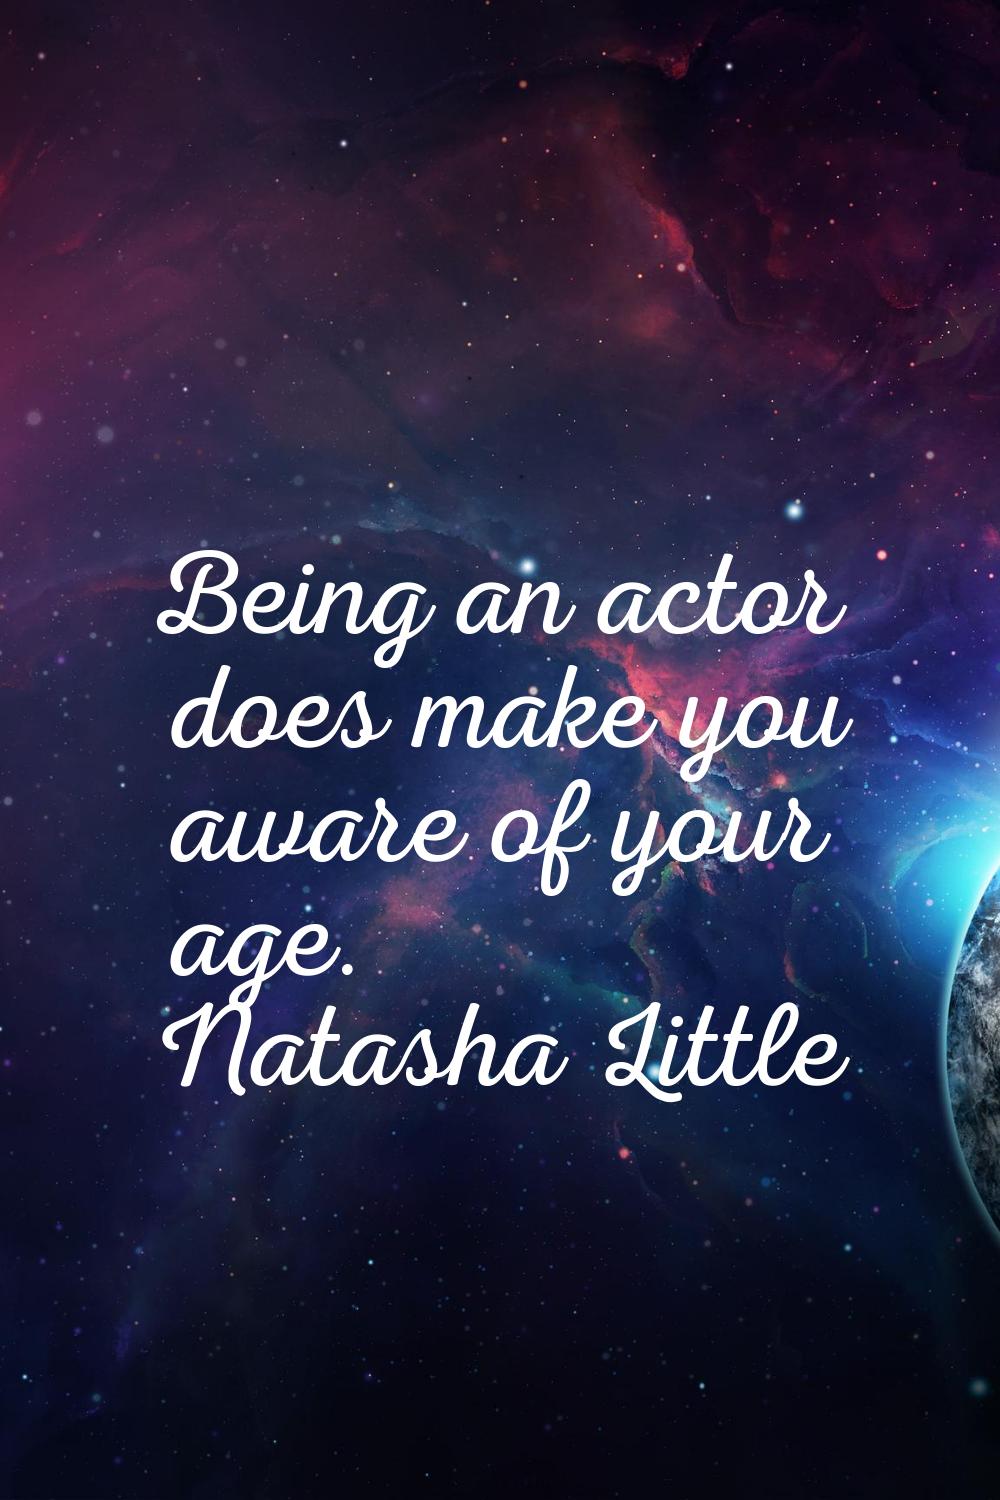 Being an actor does make you aware of your age.